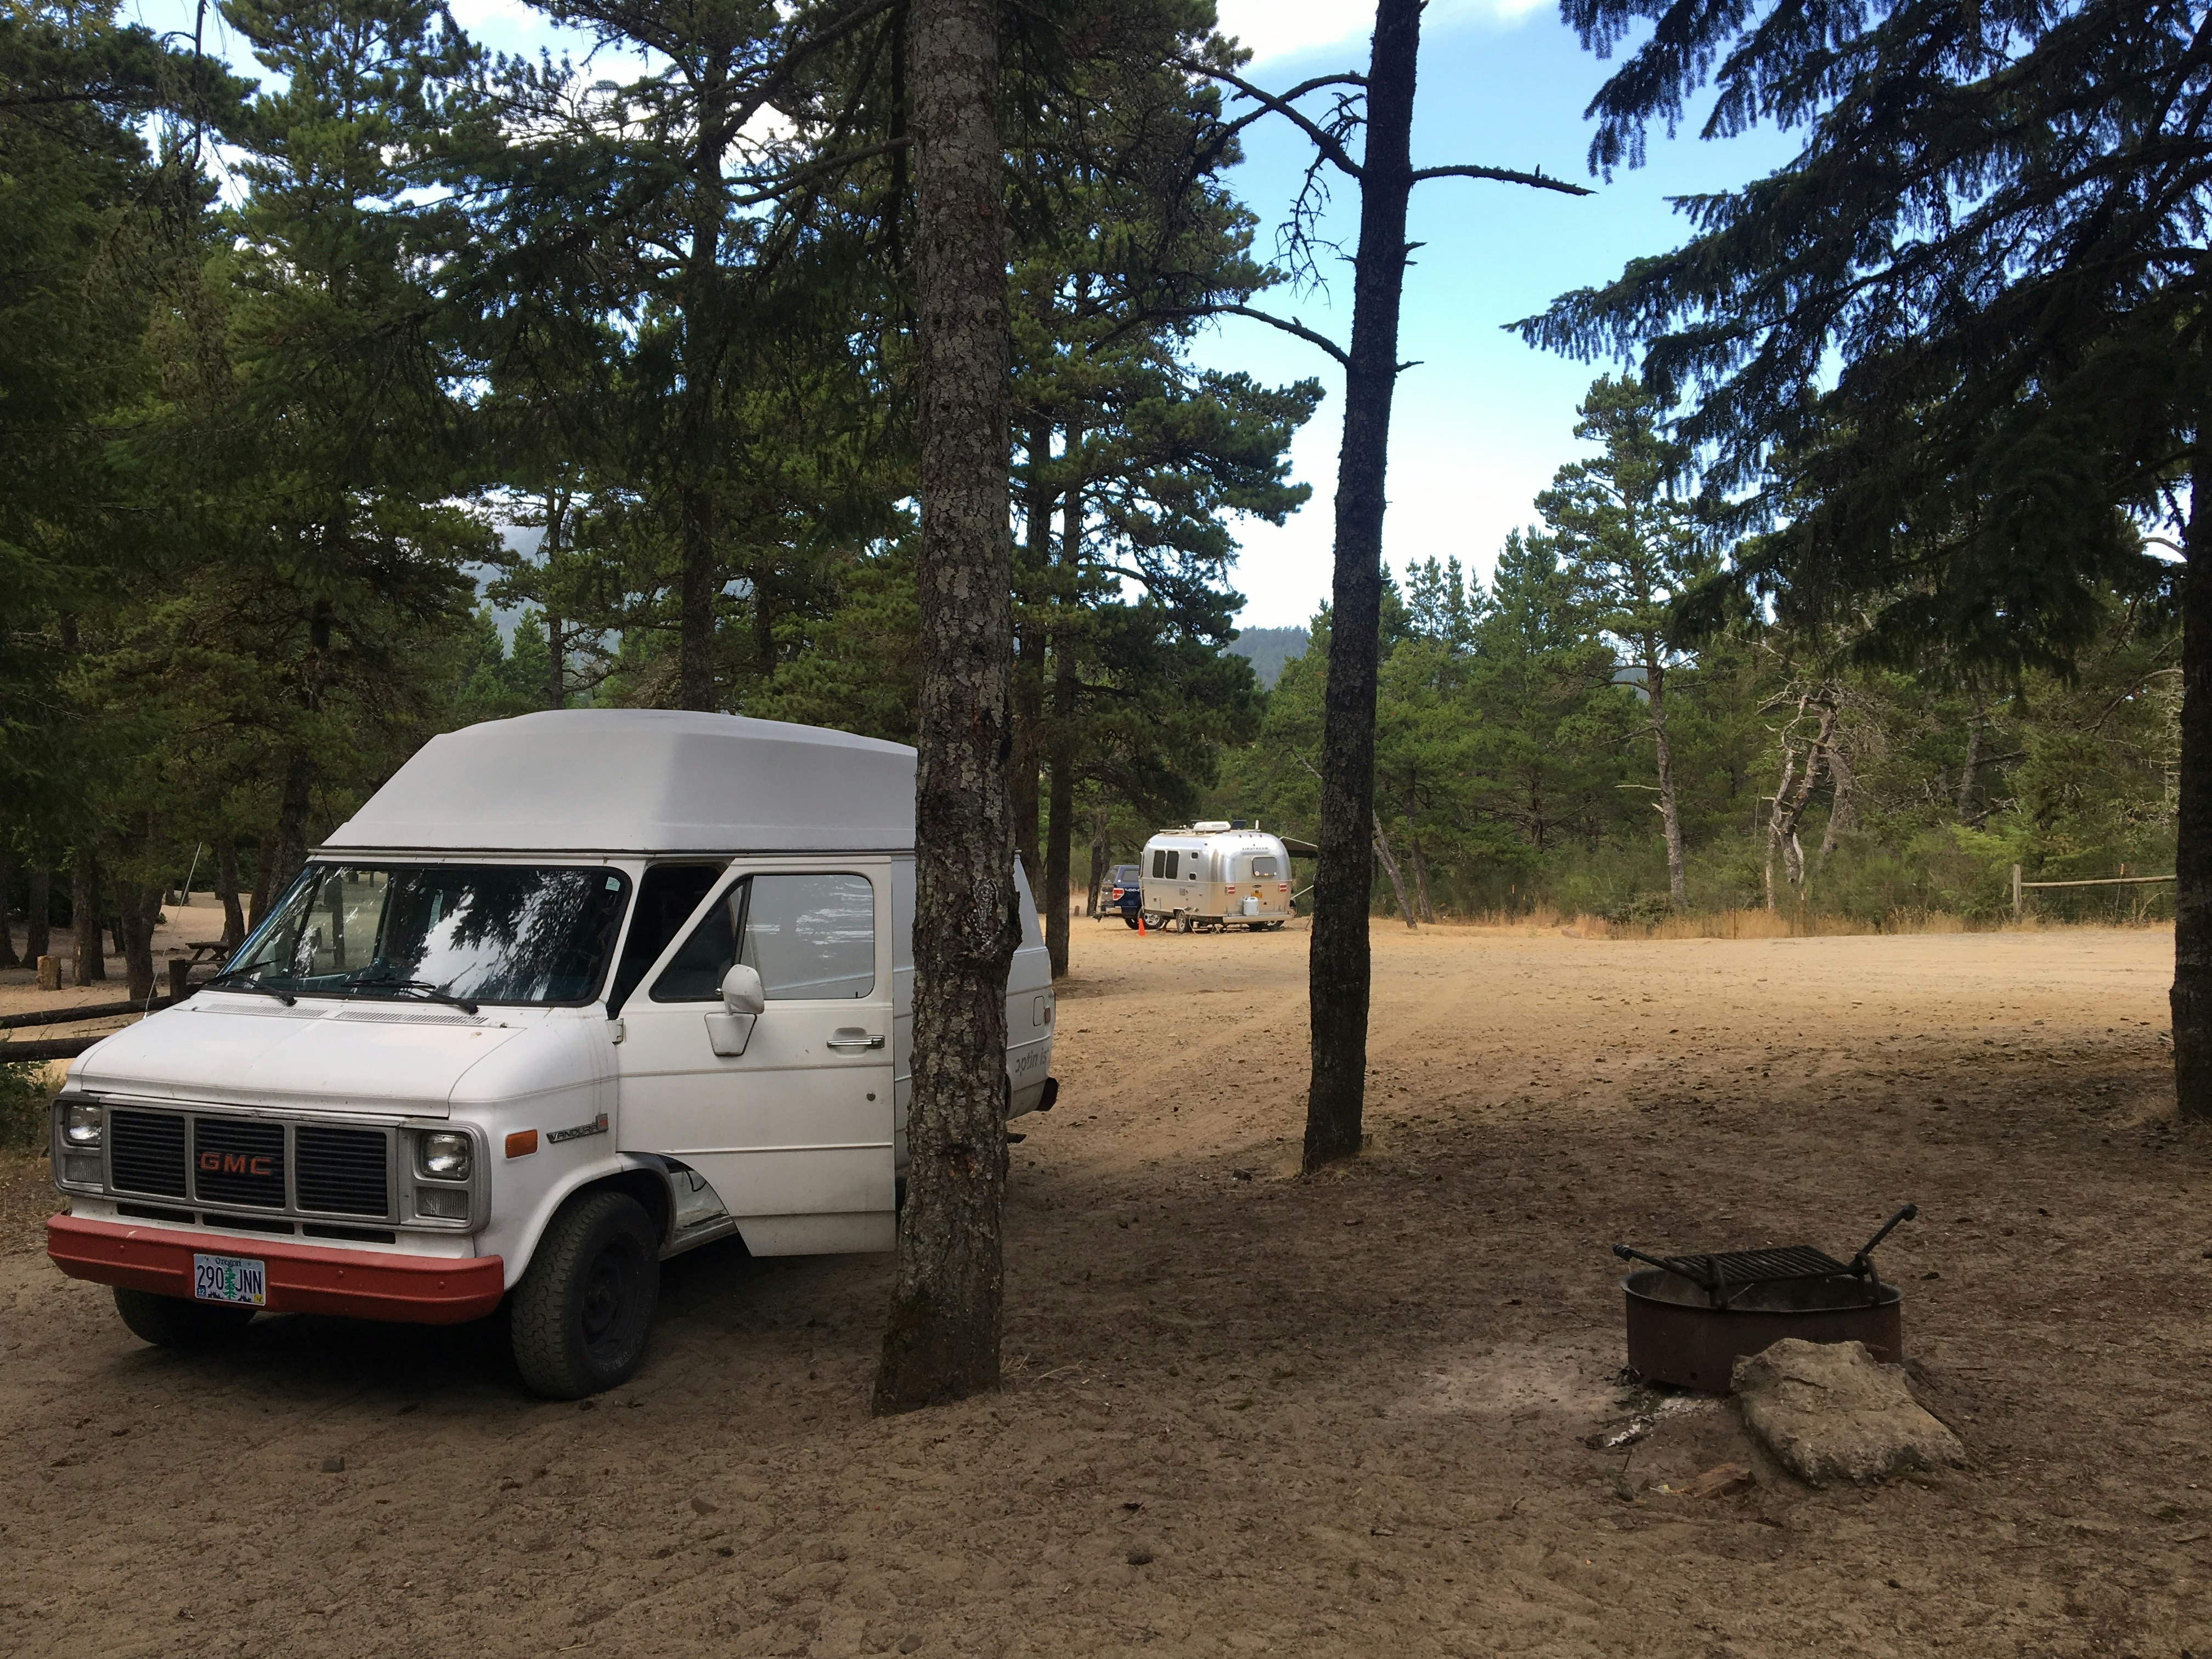 A white van with a red bumper and GMC logo on the grill sits at a campsite amongst pine trees. A metal firepit ring with grill grate sits to the right of the van. In the background is a silver Airstream trailer at another campsite.